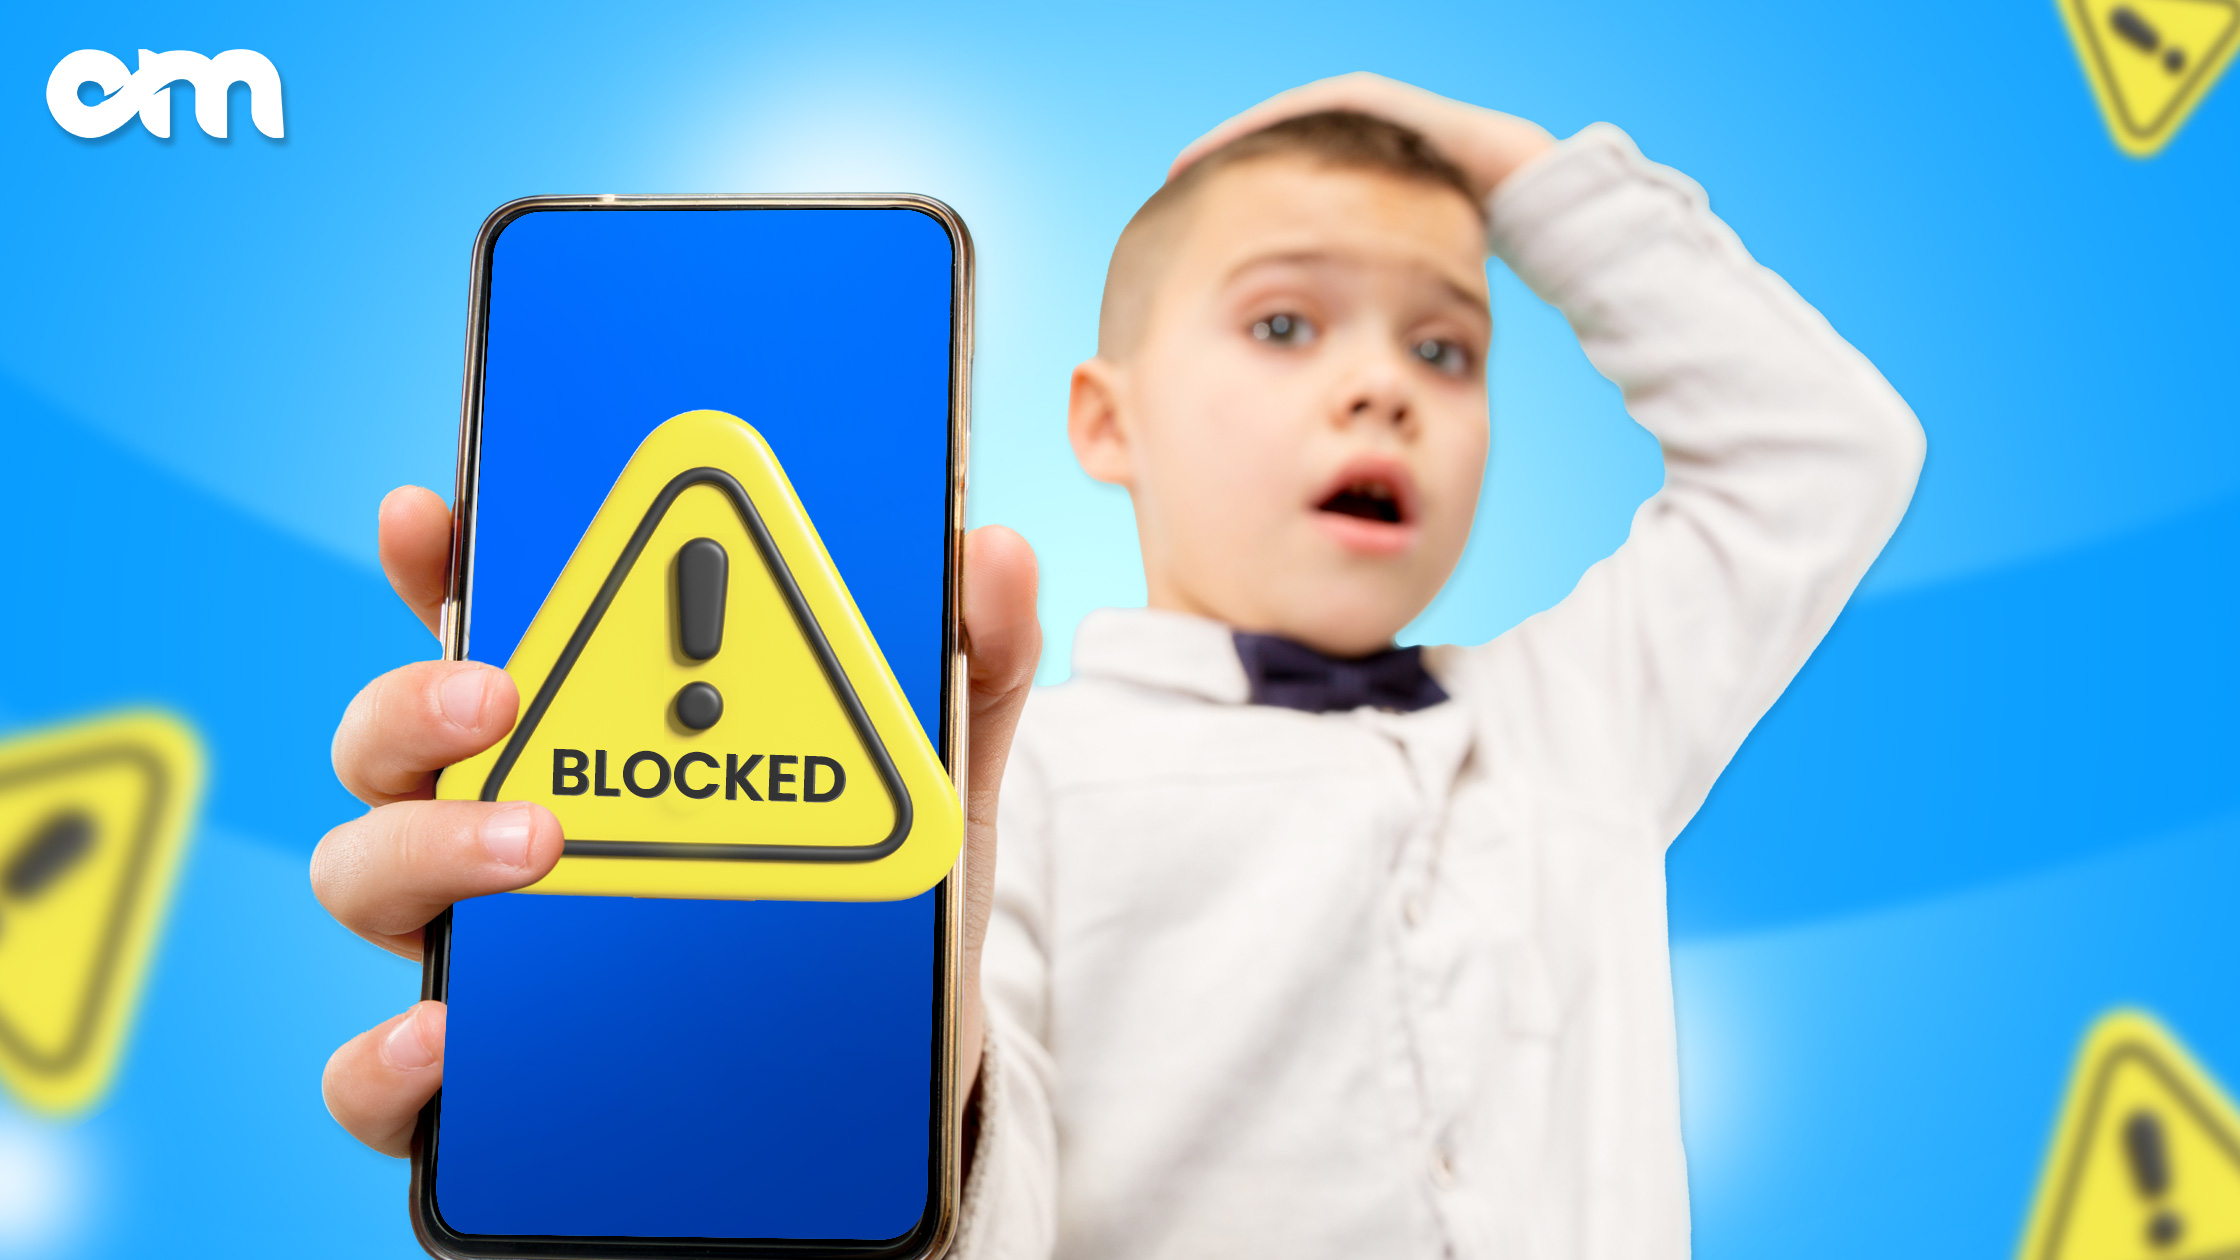 Application-Blocker-in-Parental-Control-Regulating-Access-to-Apps-for-Child-Safety